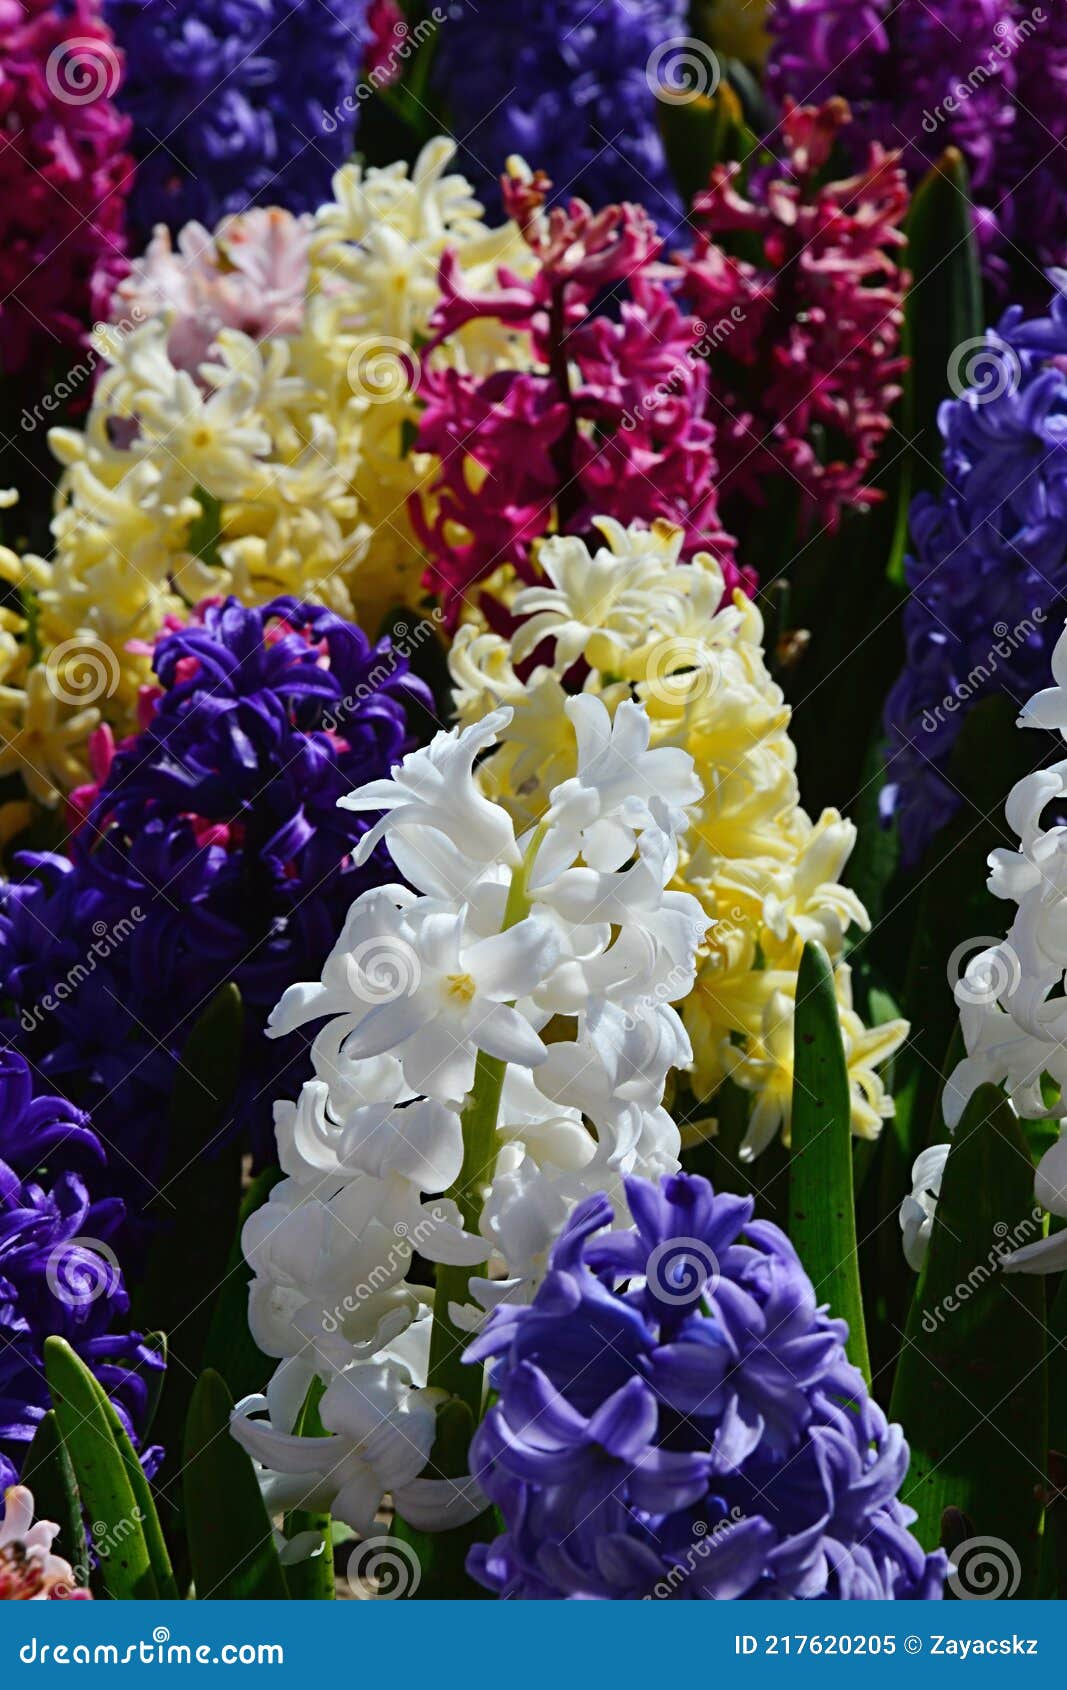 detail of blossoming colorful fragrant cultivars of common hyacinth flowers, latin name hyacinthus orientalis.